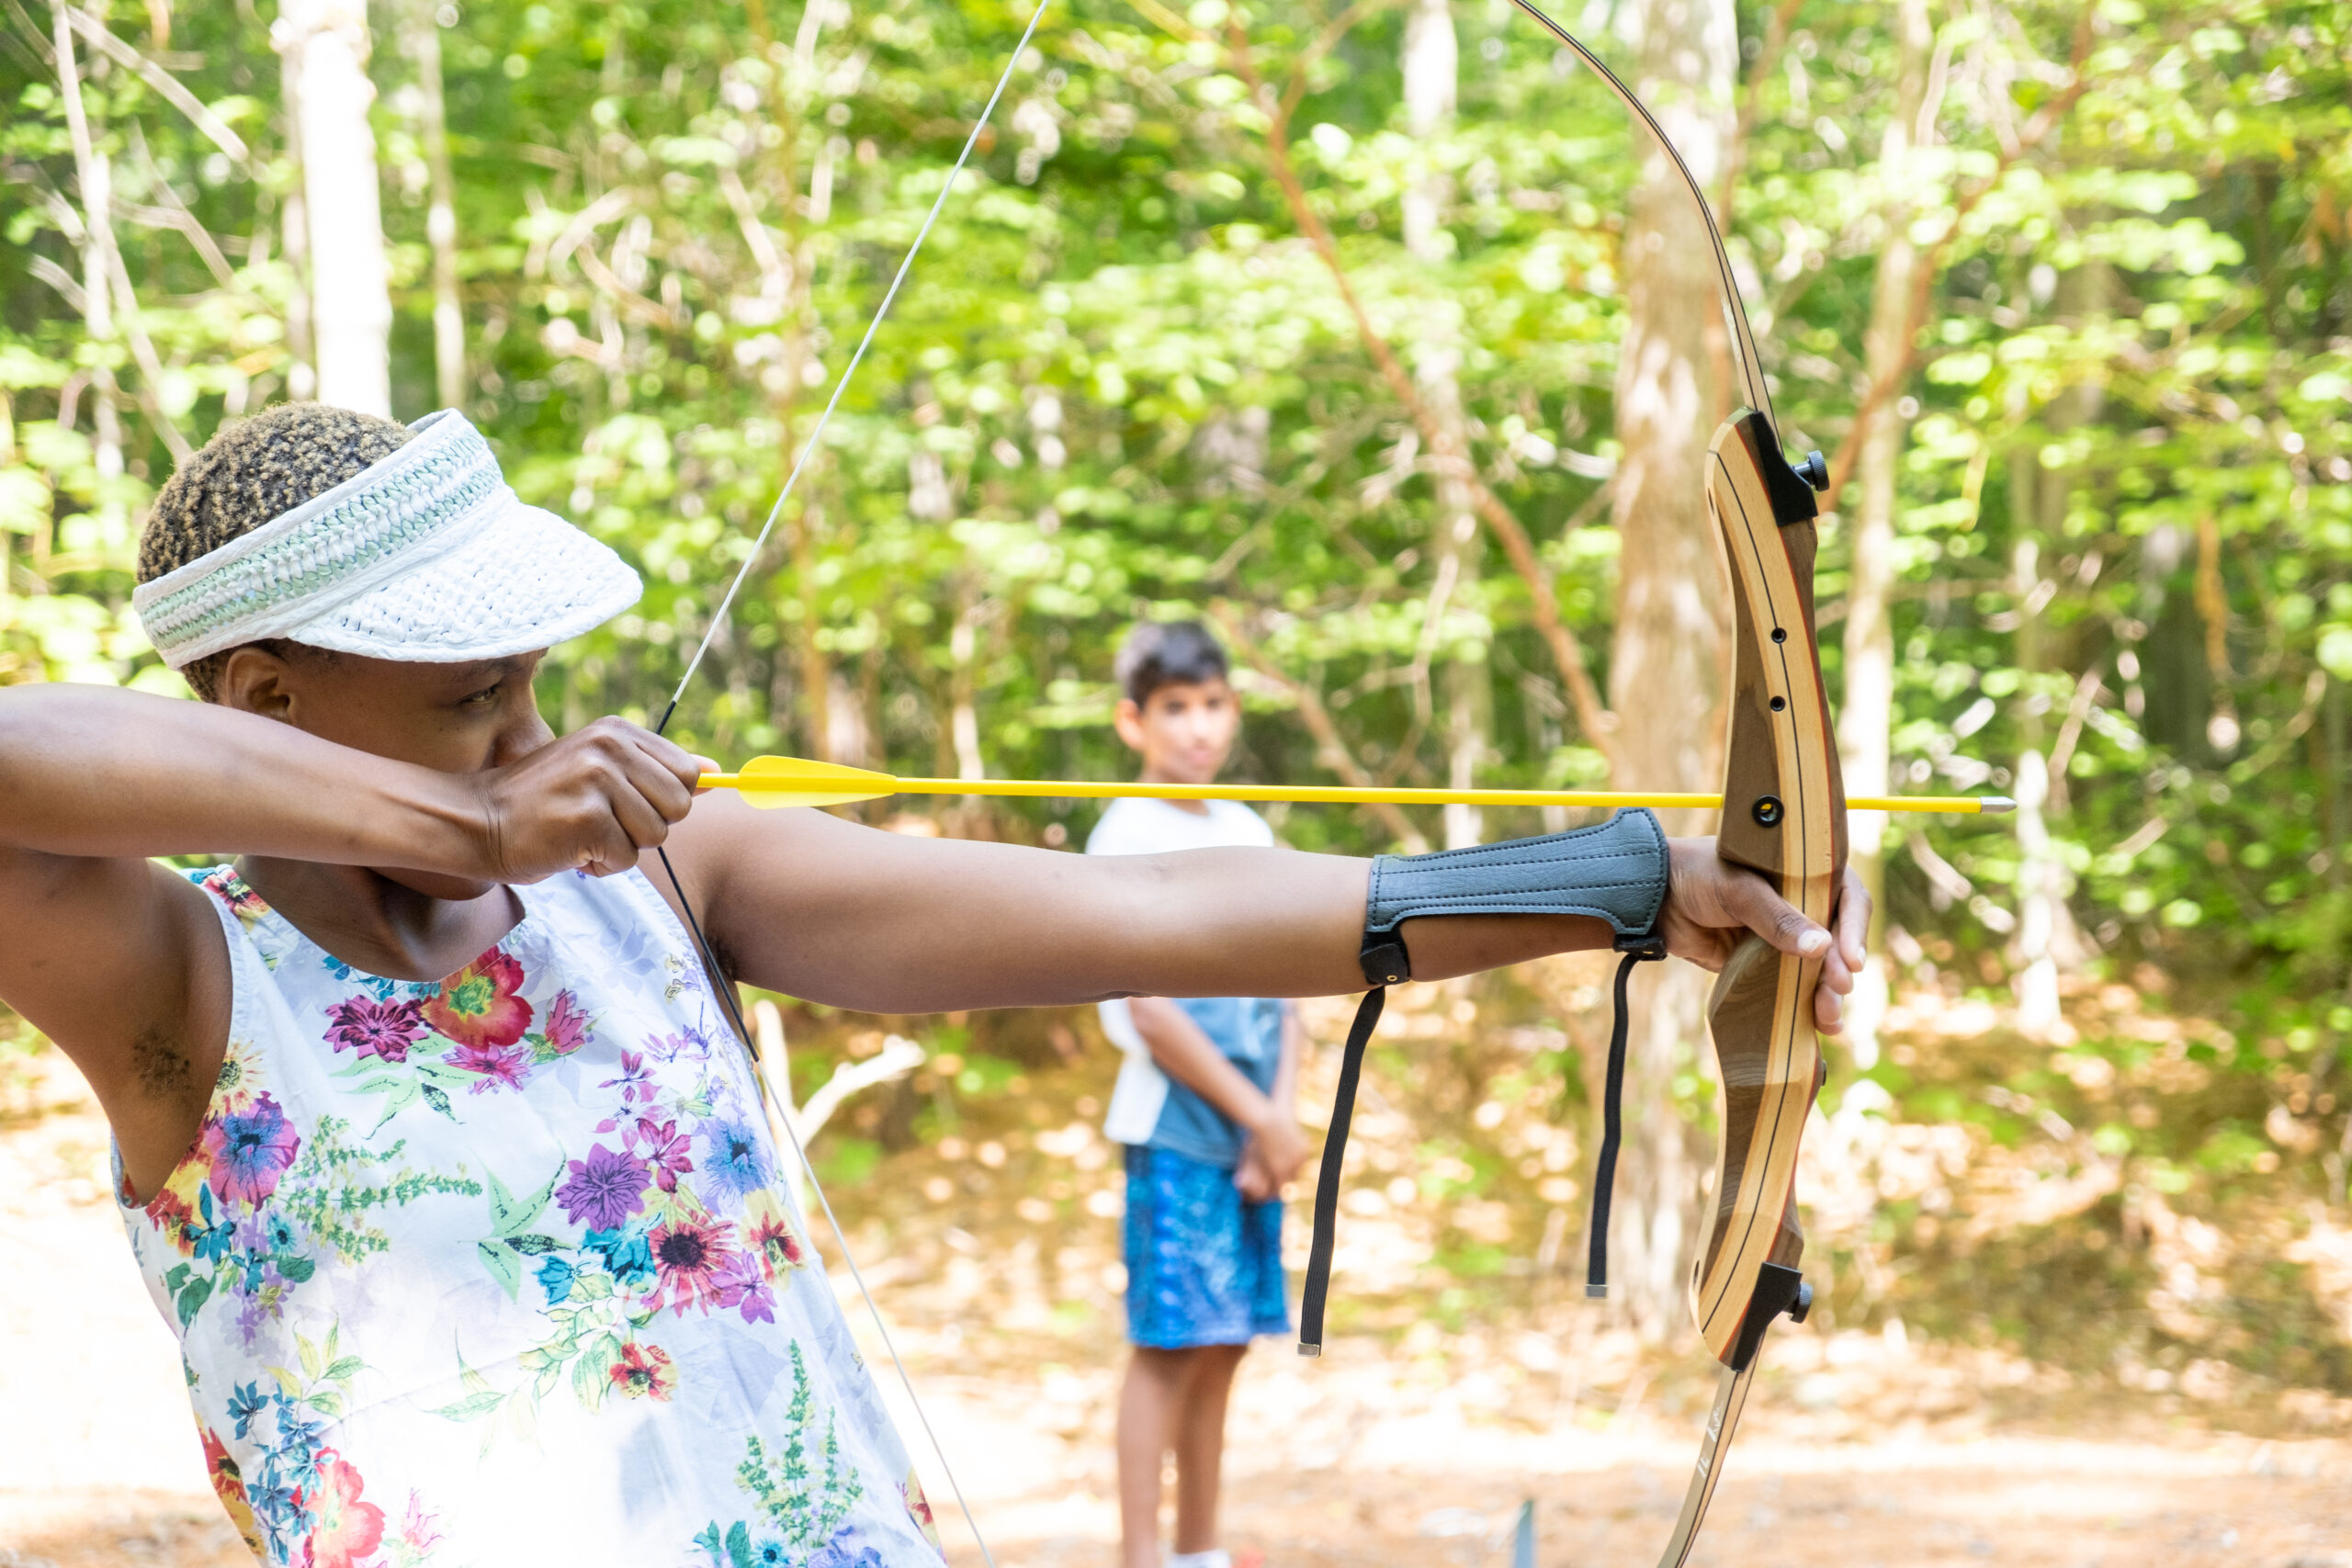 A child at Camp Hale shooting a bow and arrow